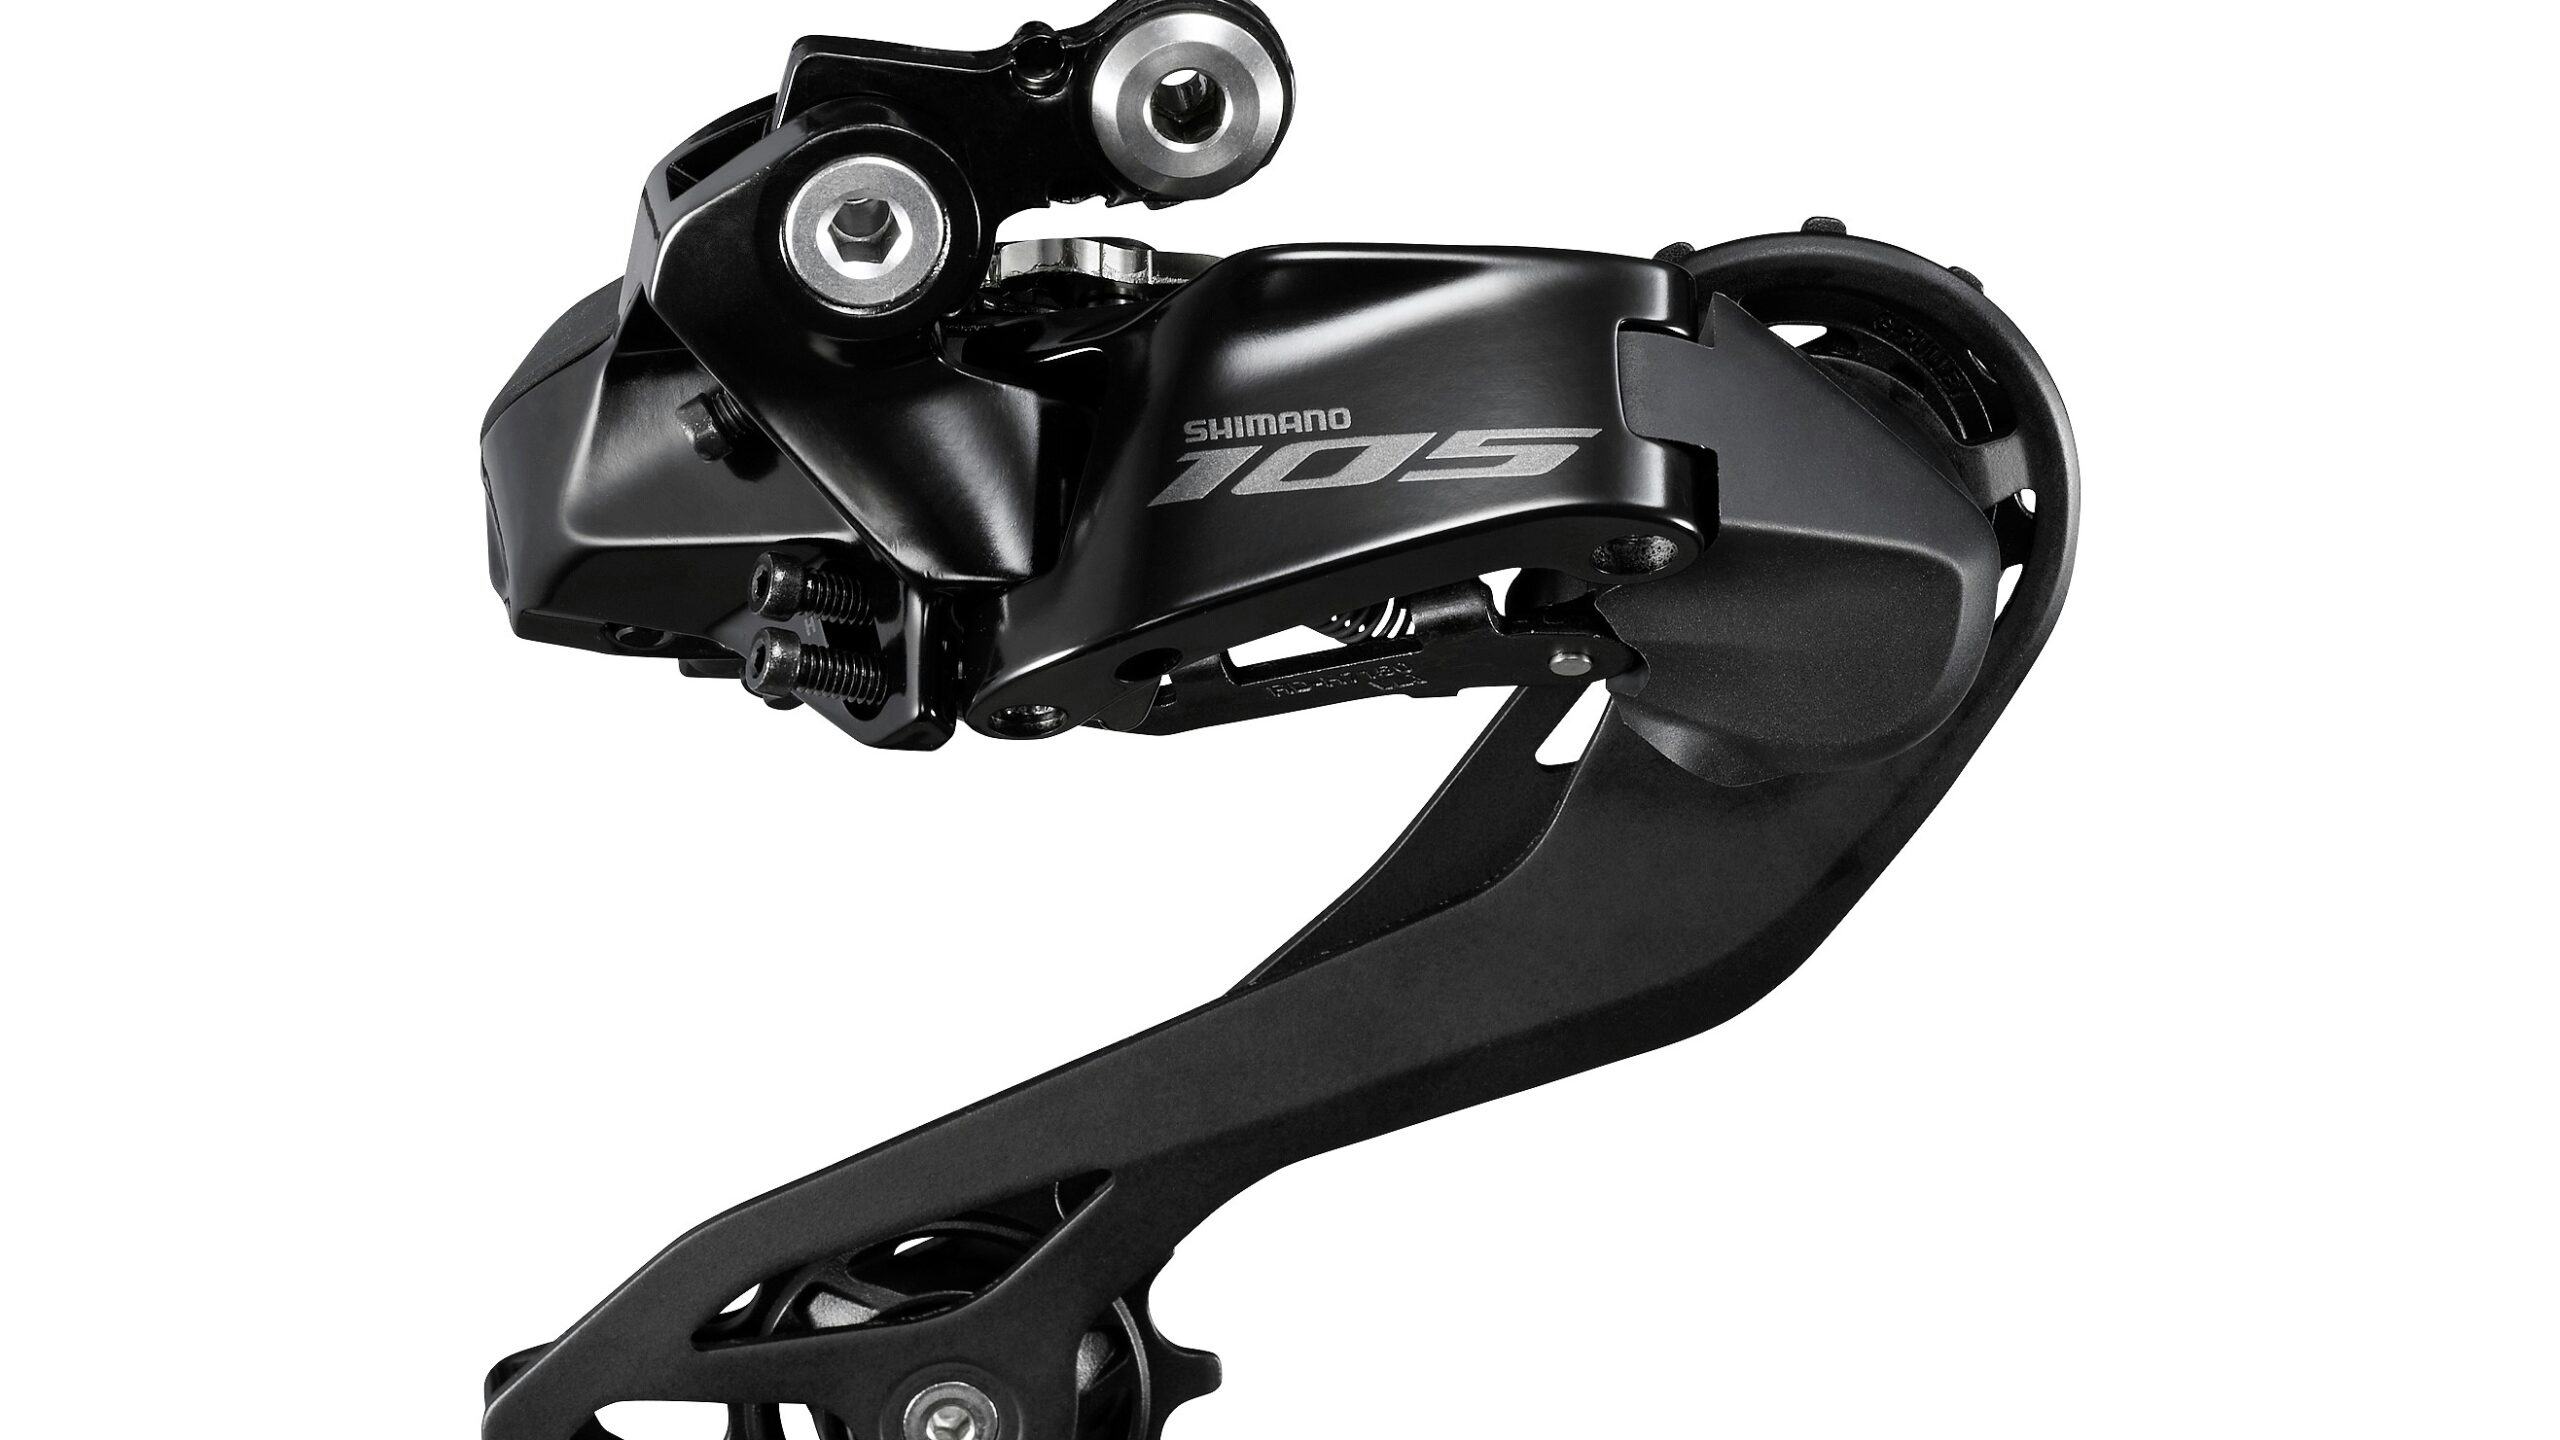 The new Shimano 105 group set attracts a lot of attention reports the component manufacturer. – Photo Shimano